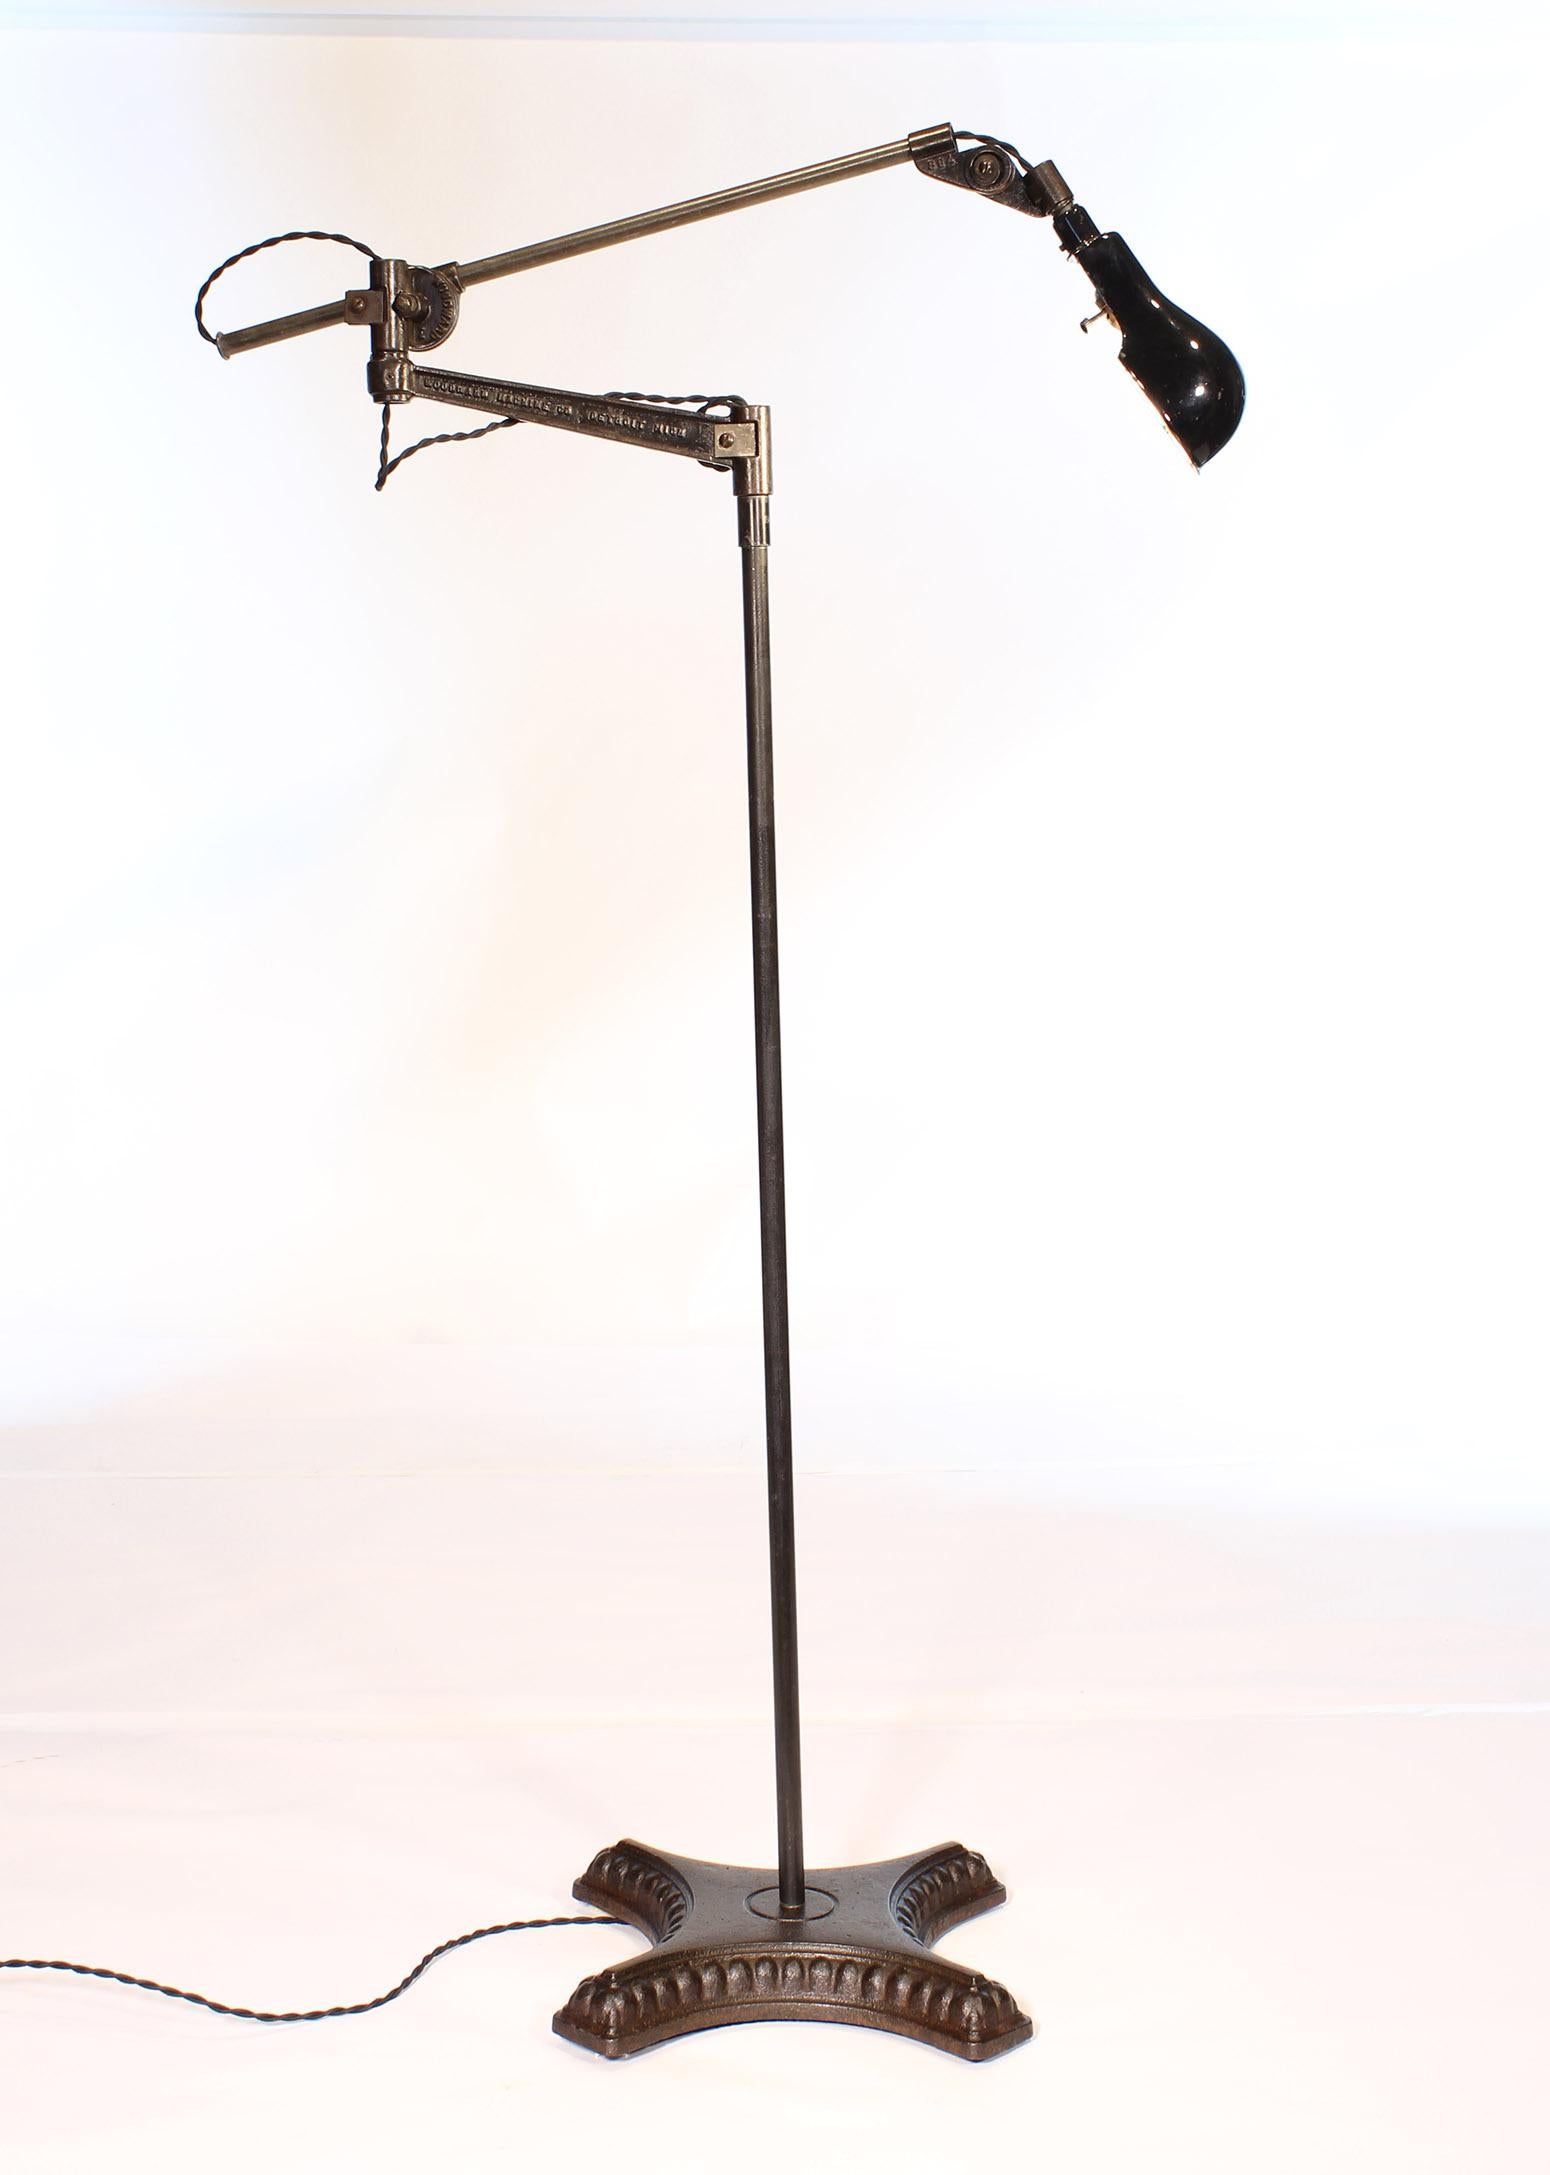 Authentic vintage industrial adjustable Woodward cast iron and steel floor lamp / reading light. Lamp is fully adjustable, with a swivel top, and can be formed into a variety of positions. Overall height is adjustable from 55 1/2